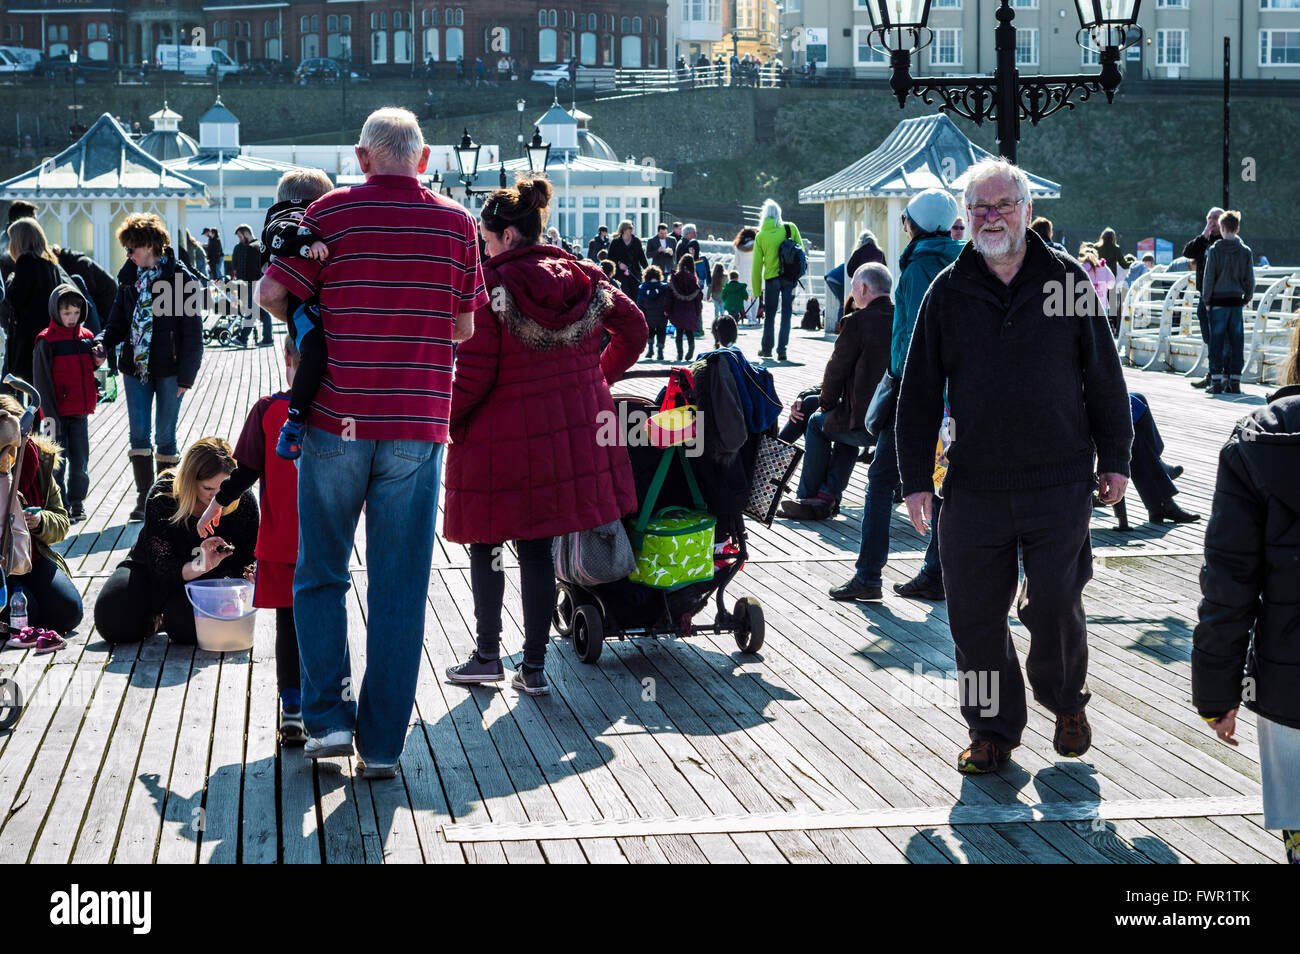 People on Cromer Pier, Norfolk, England enjoying day out Stock Photo